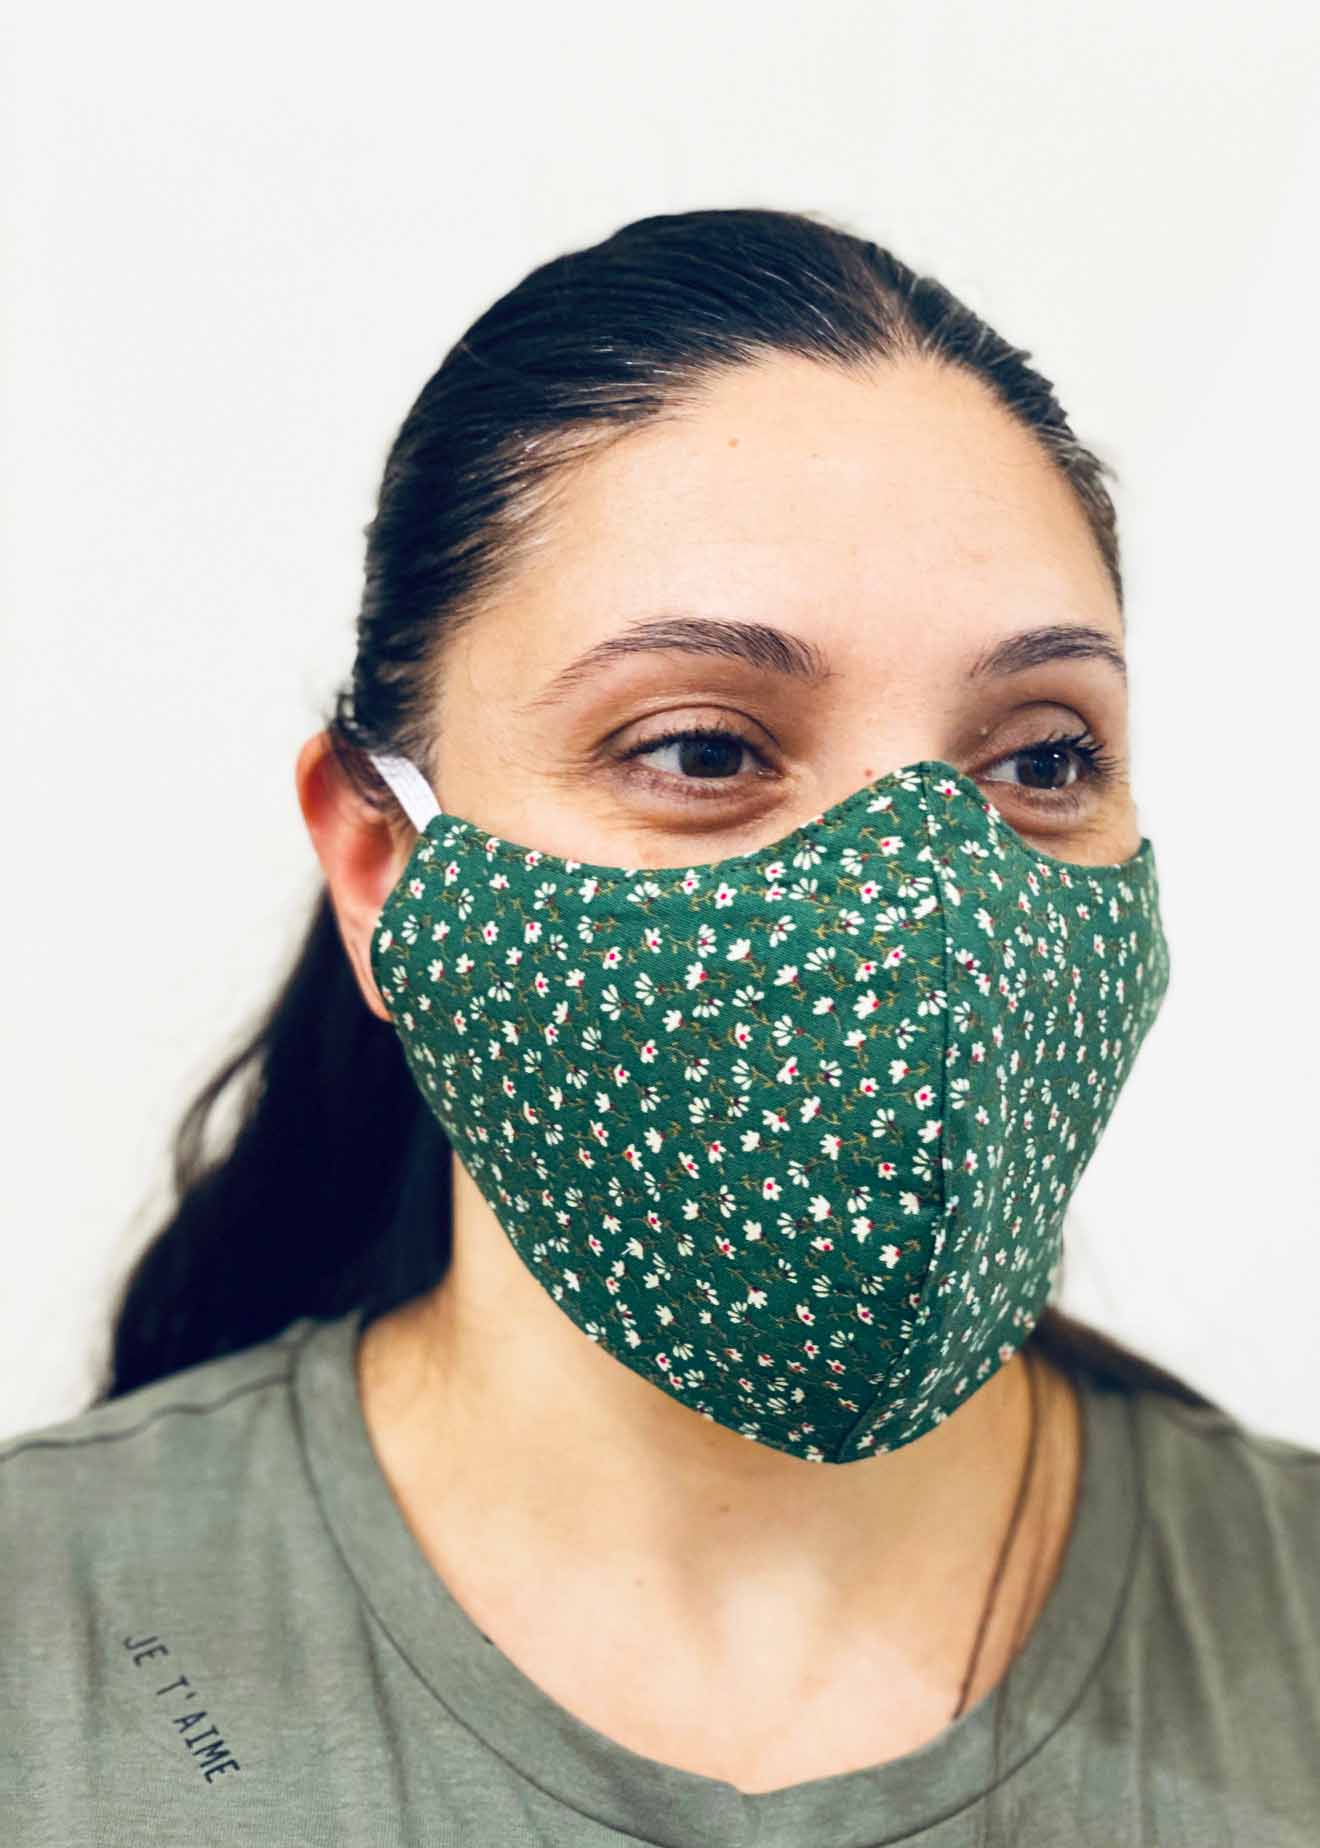 Ladies DHHS Floral Pattern Face Mask by Laundry Box Melbourne